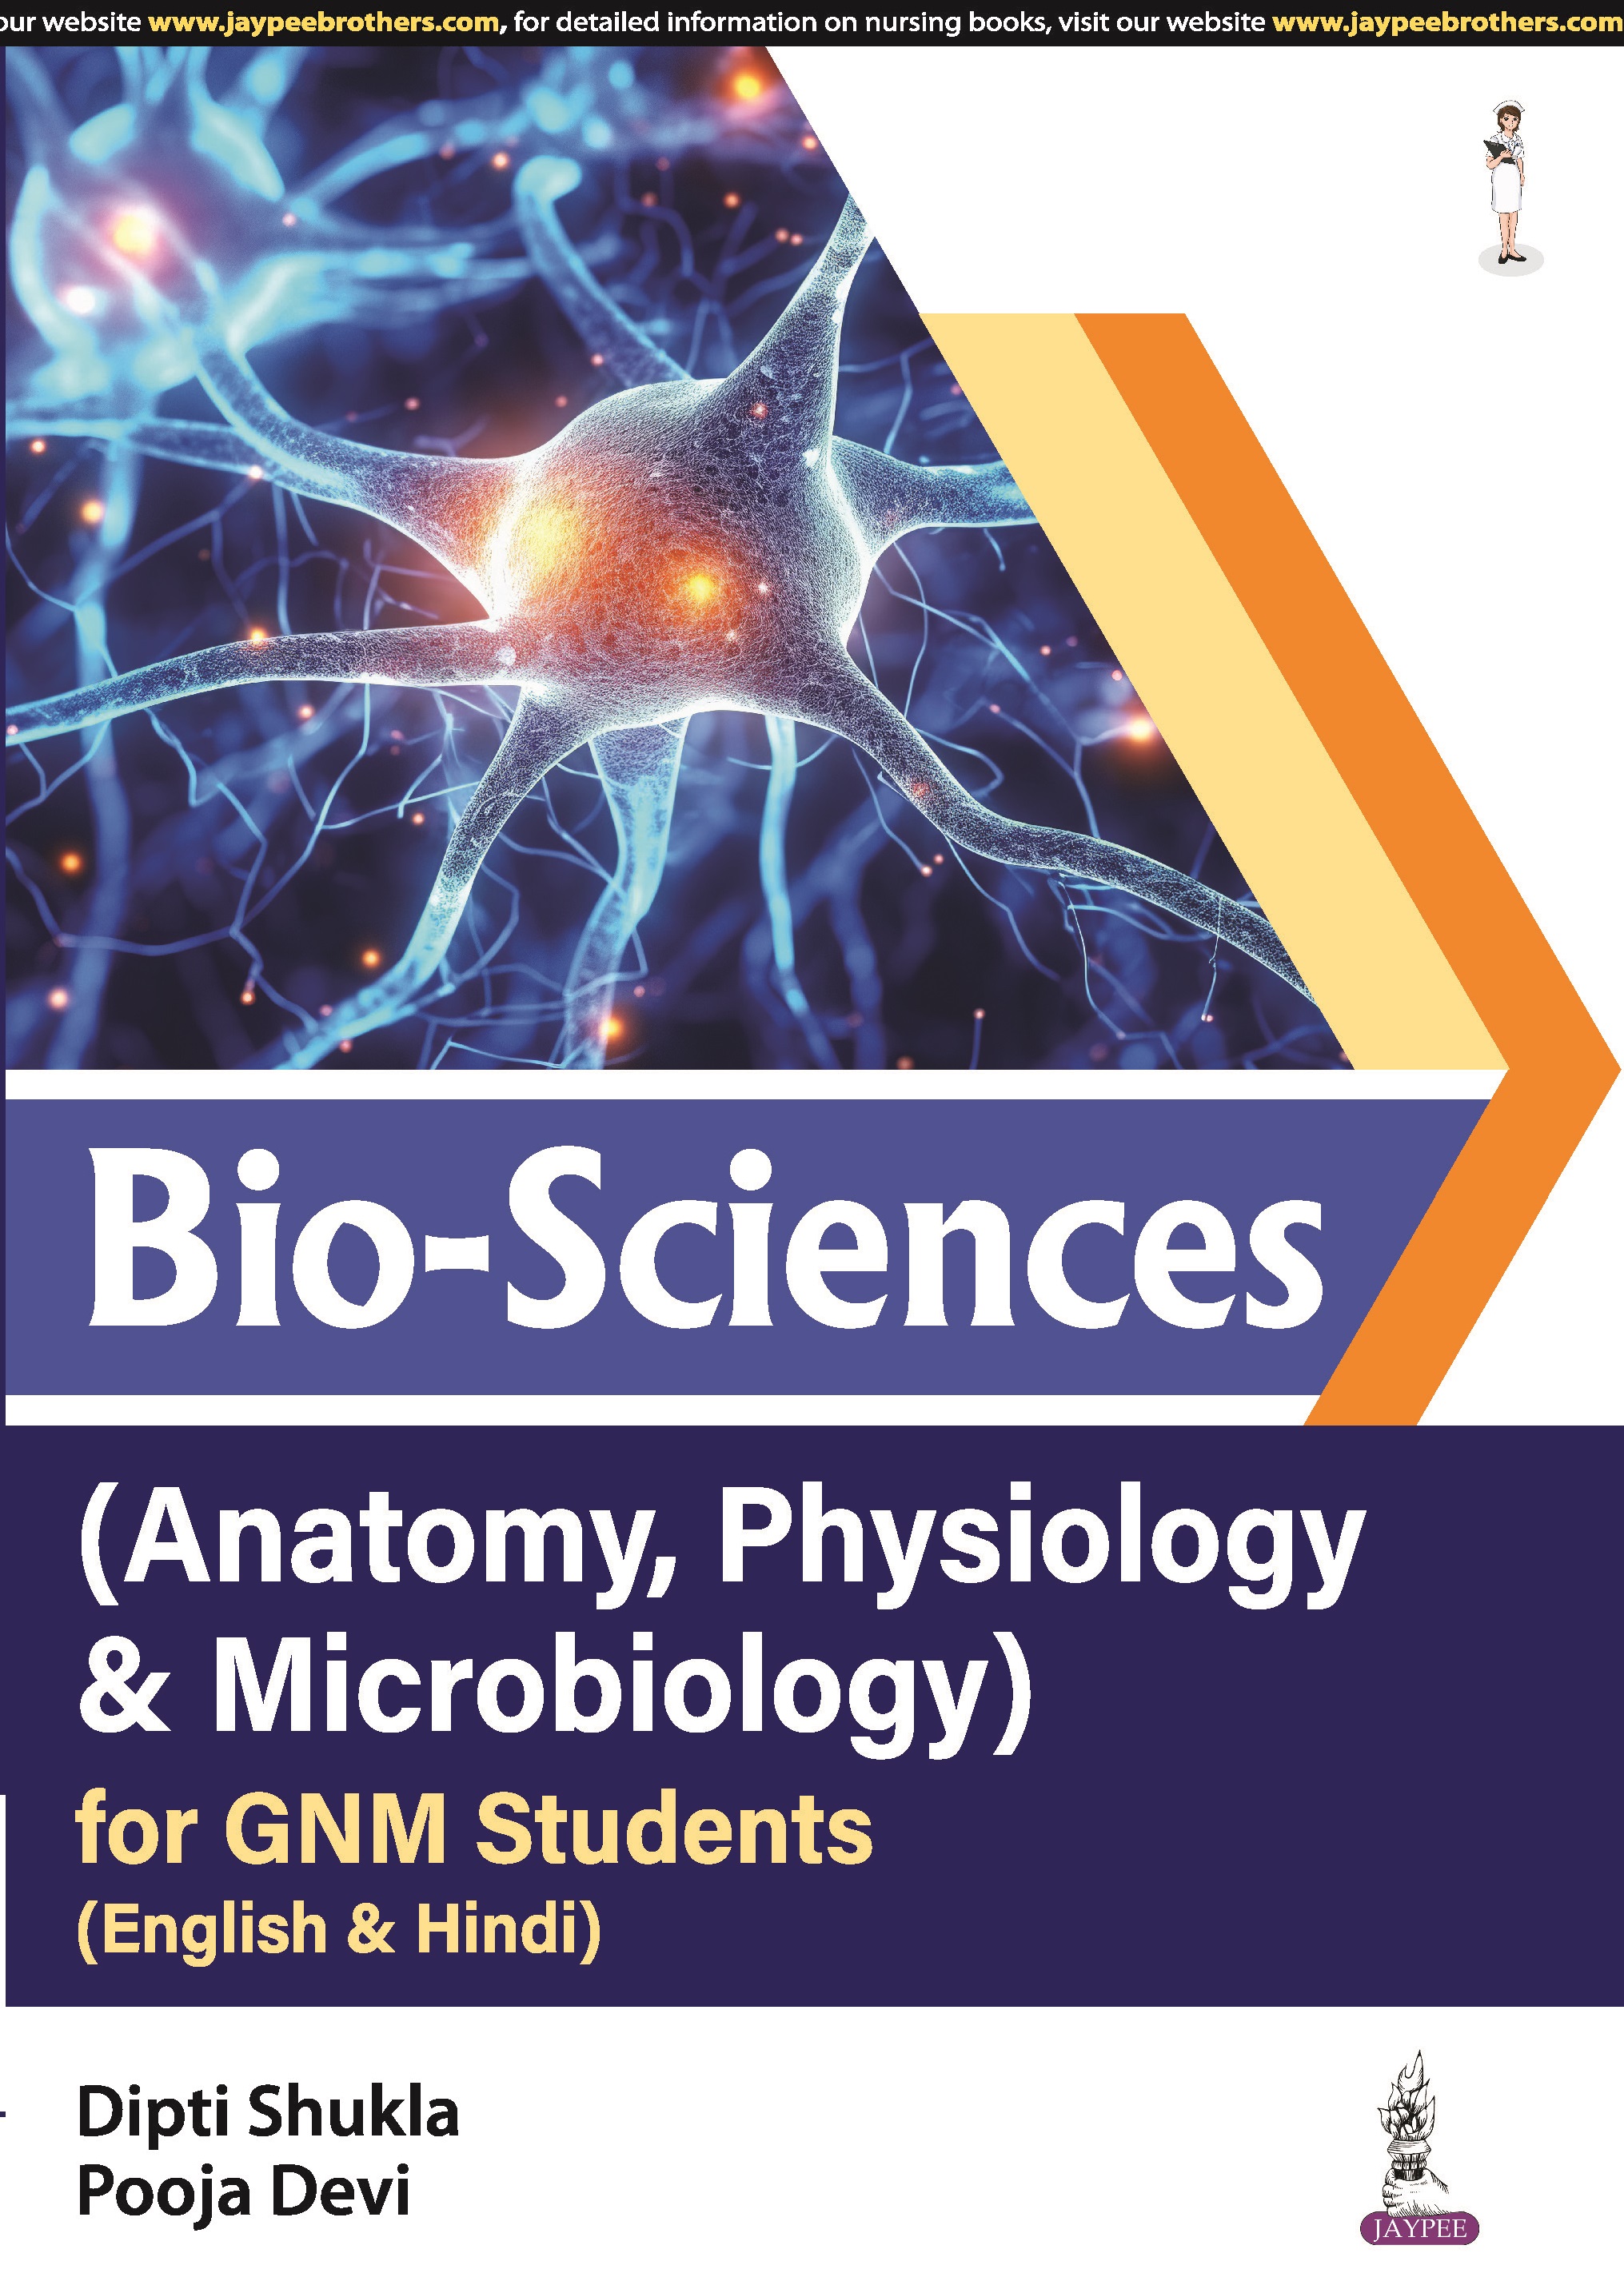 Bio-Sciences (Anatomy, Physiology & Microbiology) for GNM Students (English & Hindi)